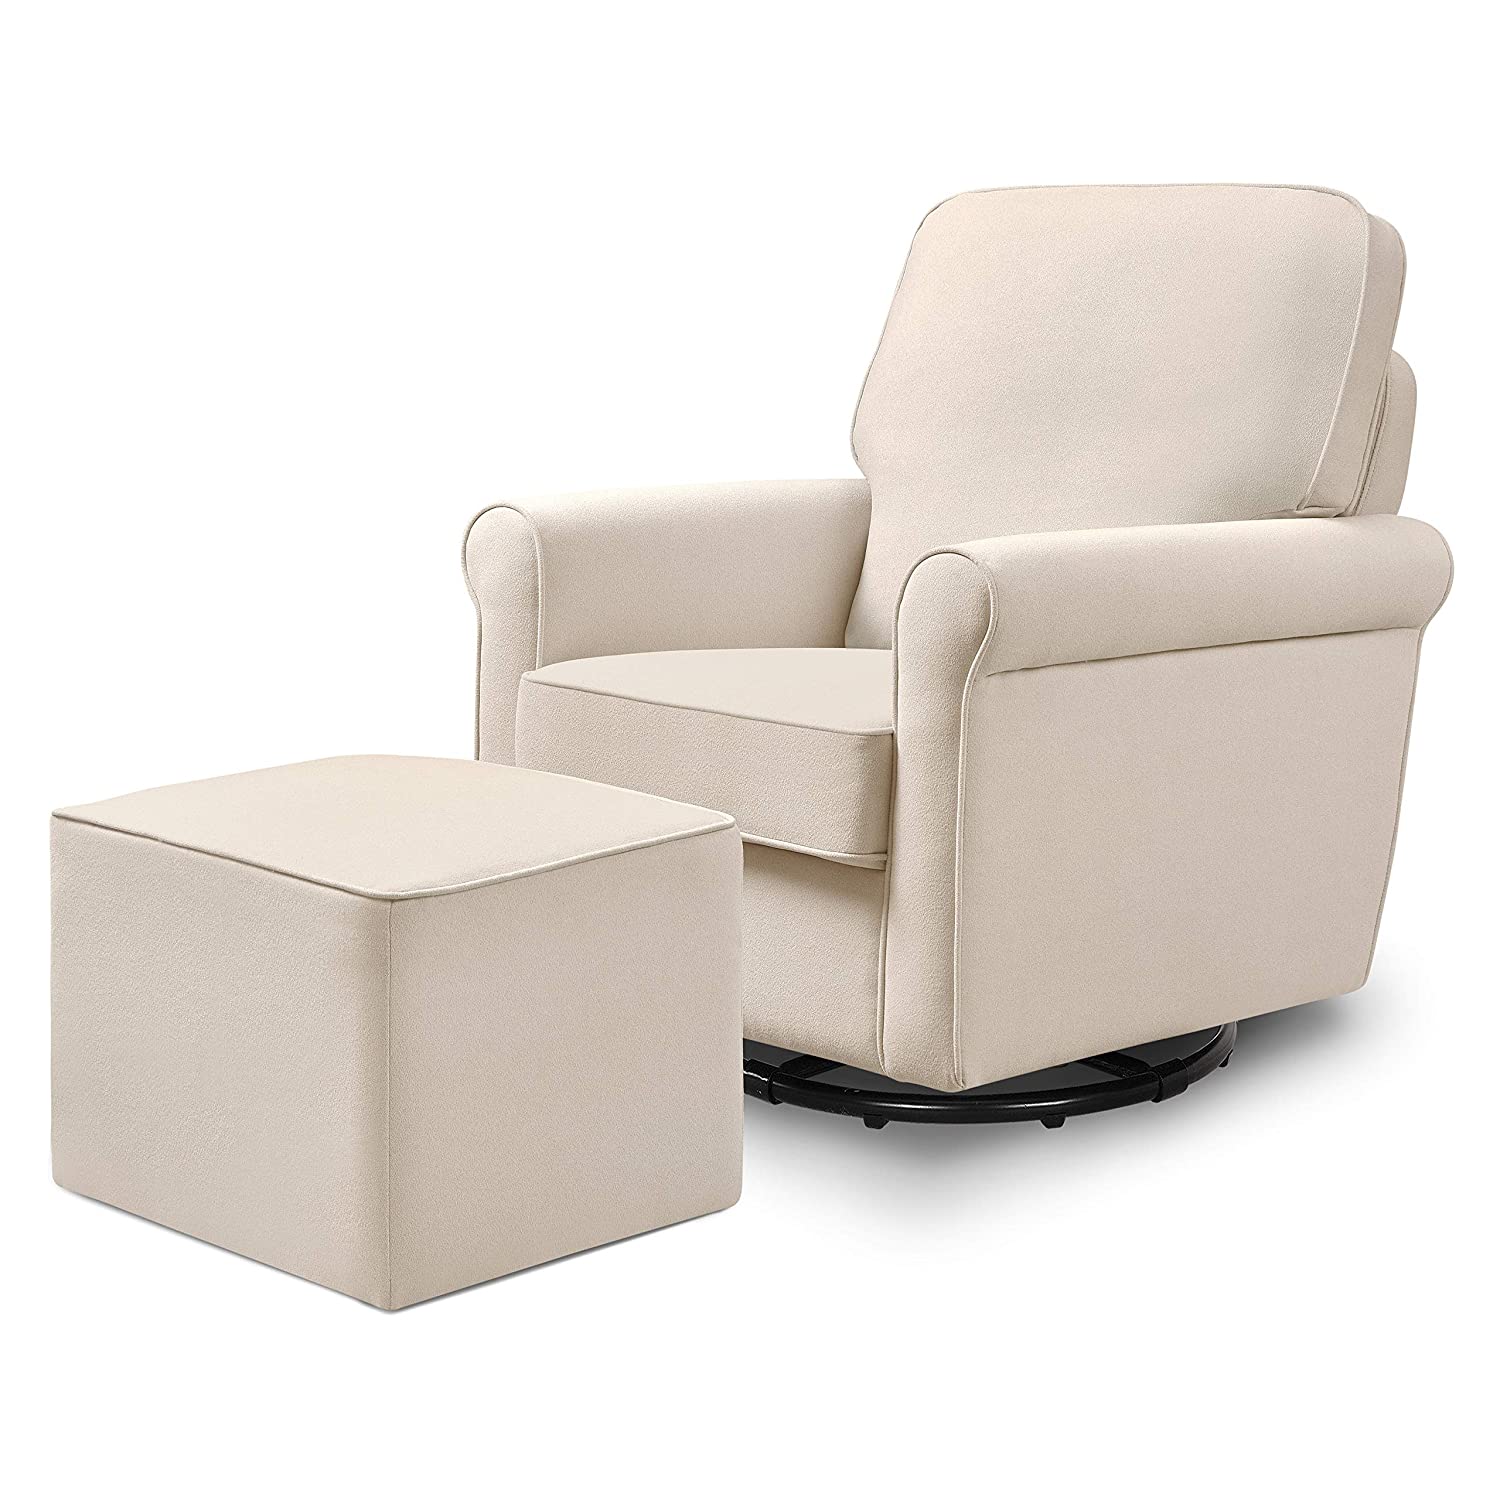 Upholstered Rocker with Ottoman in Cream